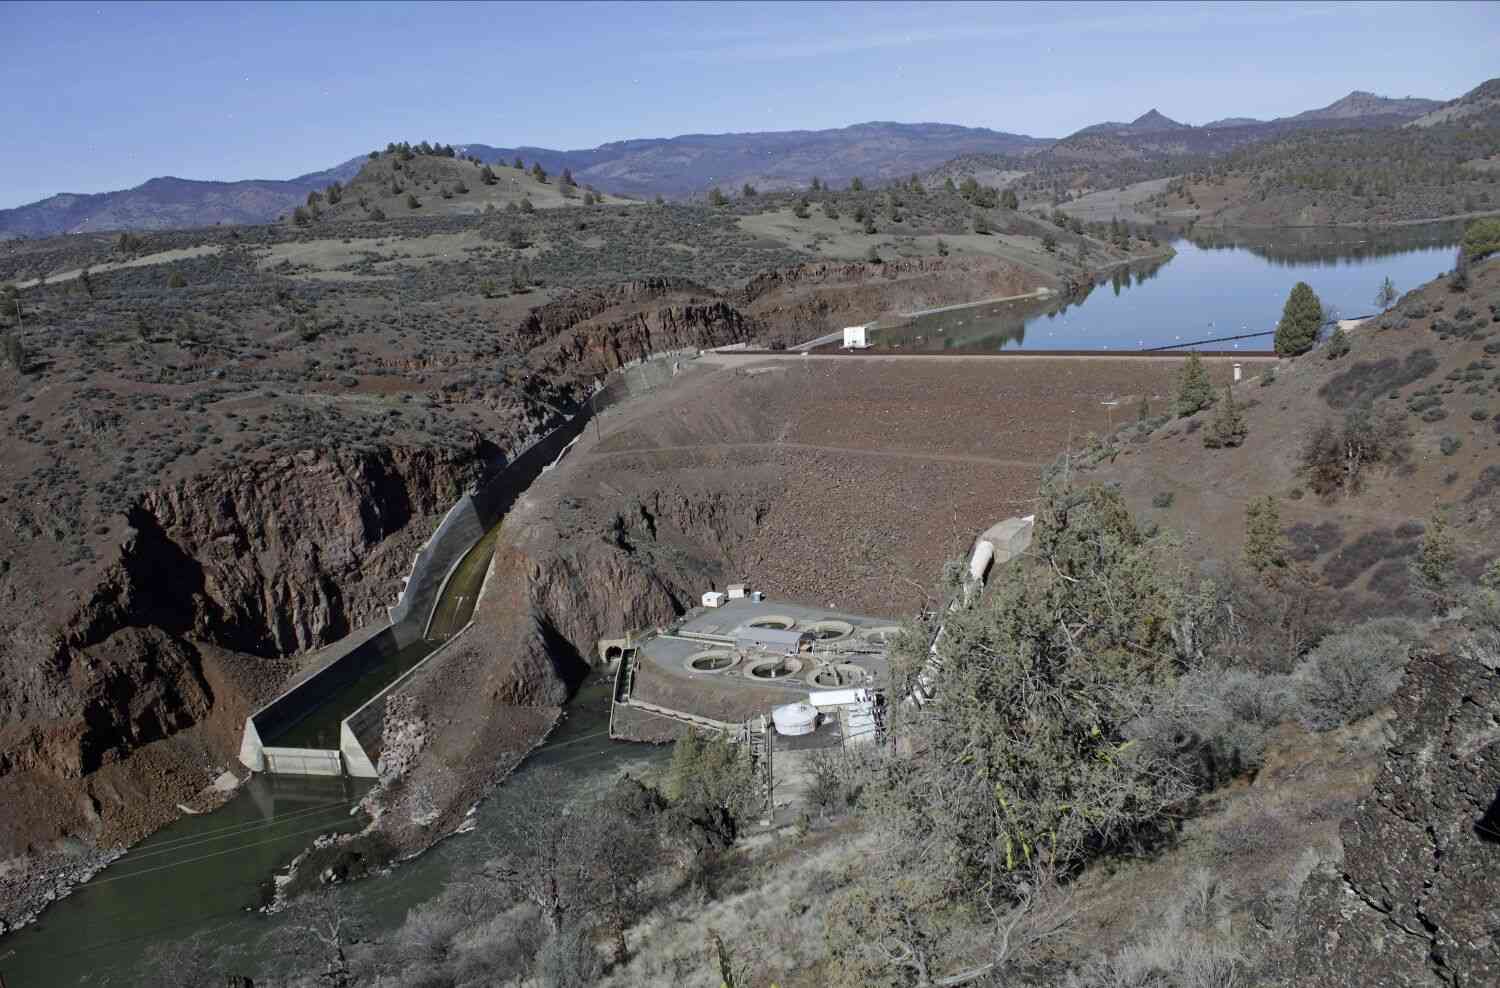 The U.S. Army Corps of Engineers approves removal of four dams on the Klamath River